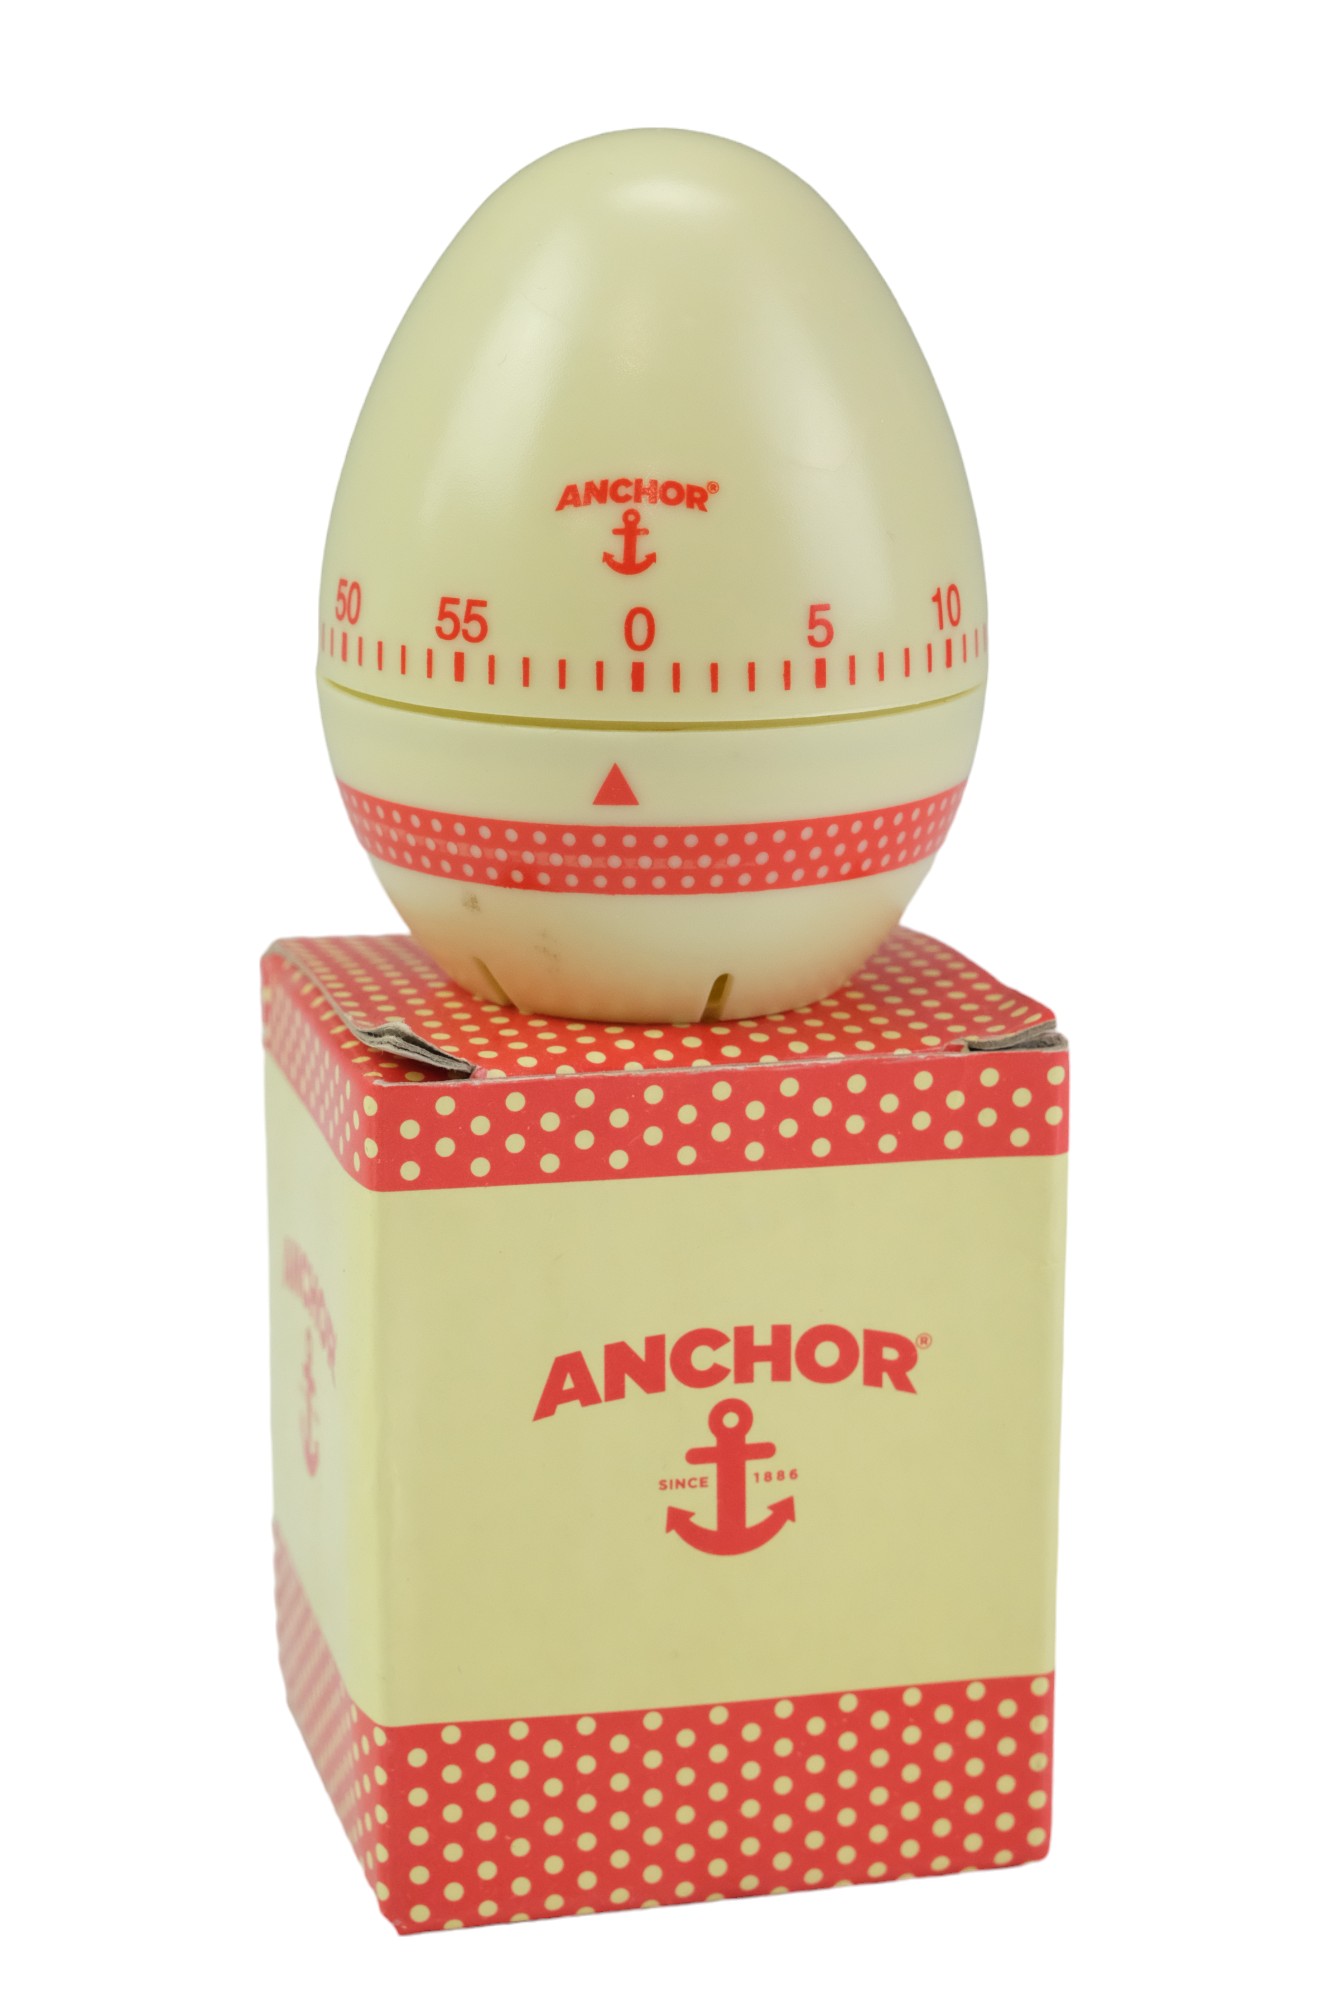 A group of Anchor Original Butter Co 125th anniversary collectibles including a ceramic toast - Image 7 of 8